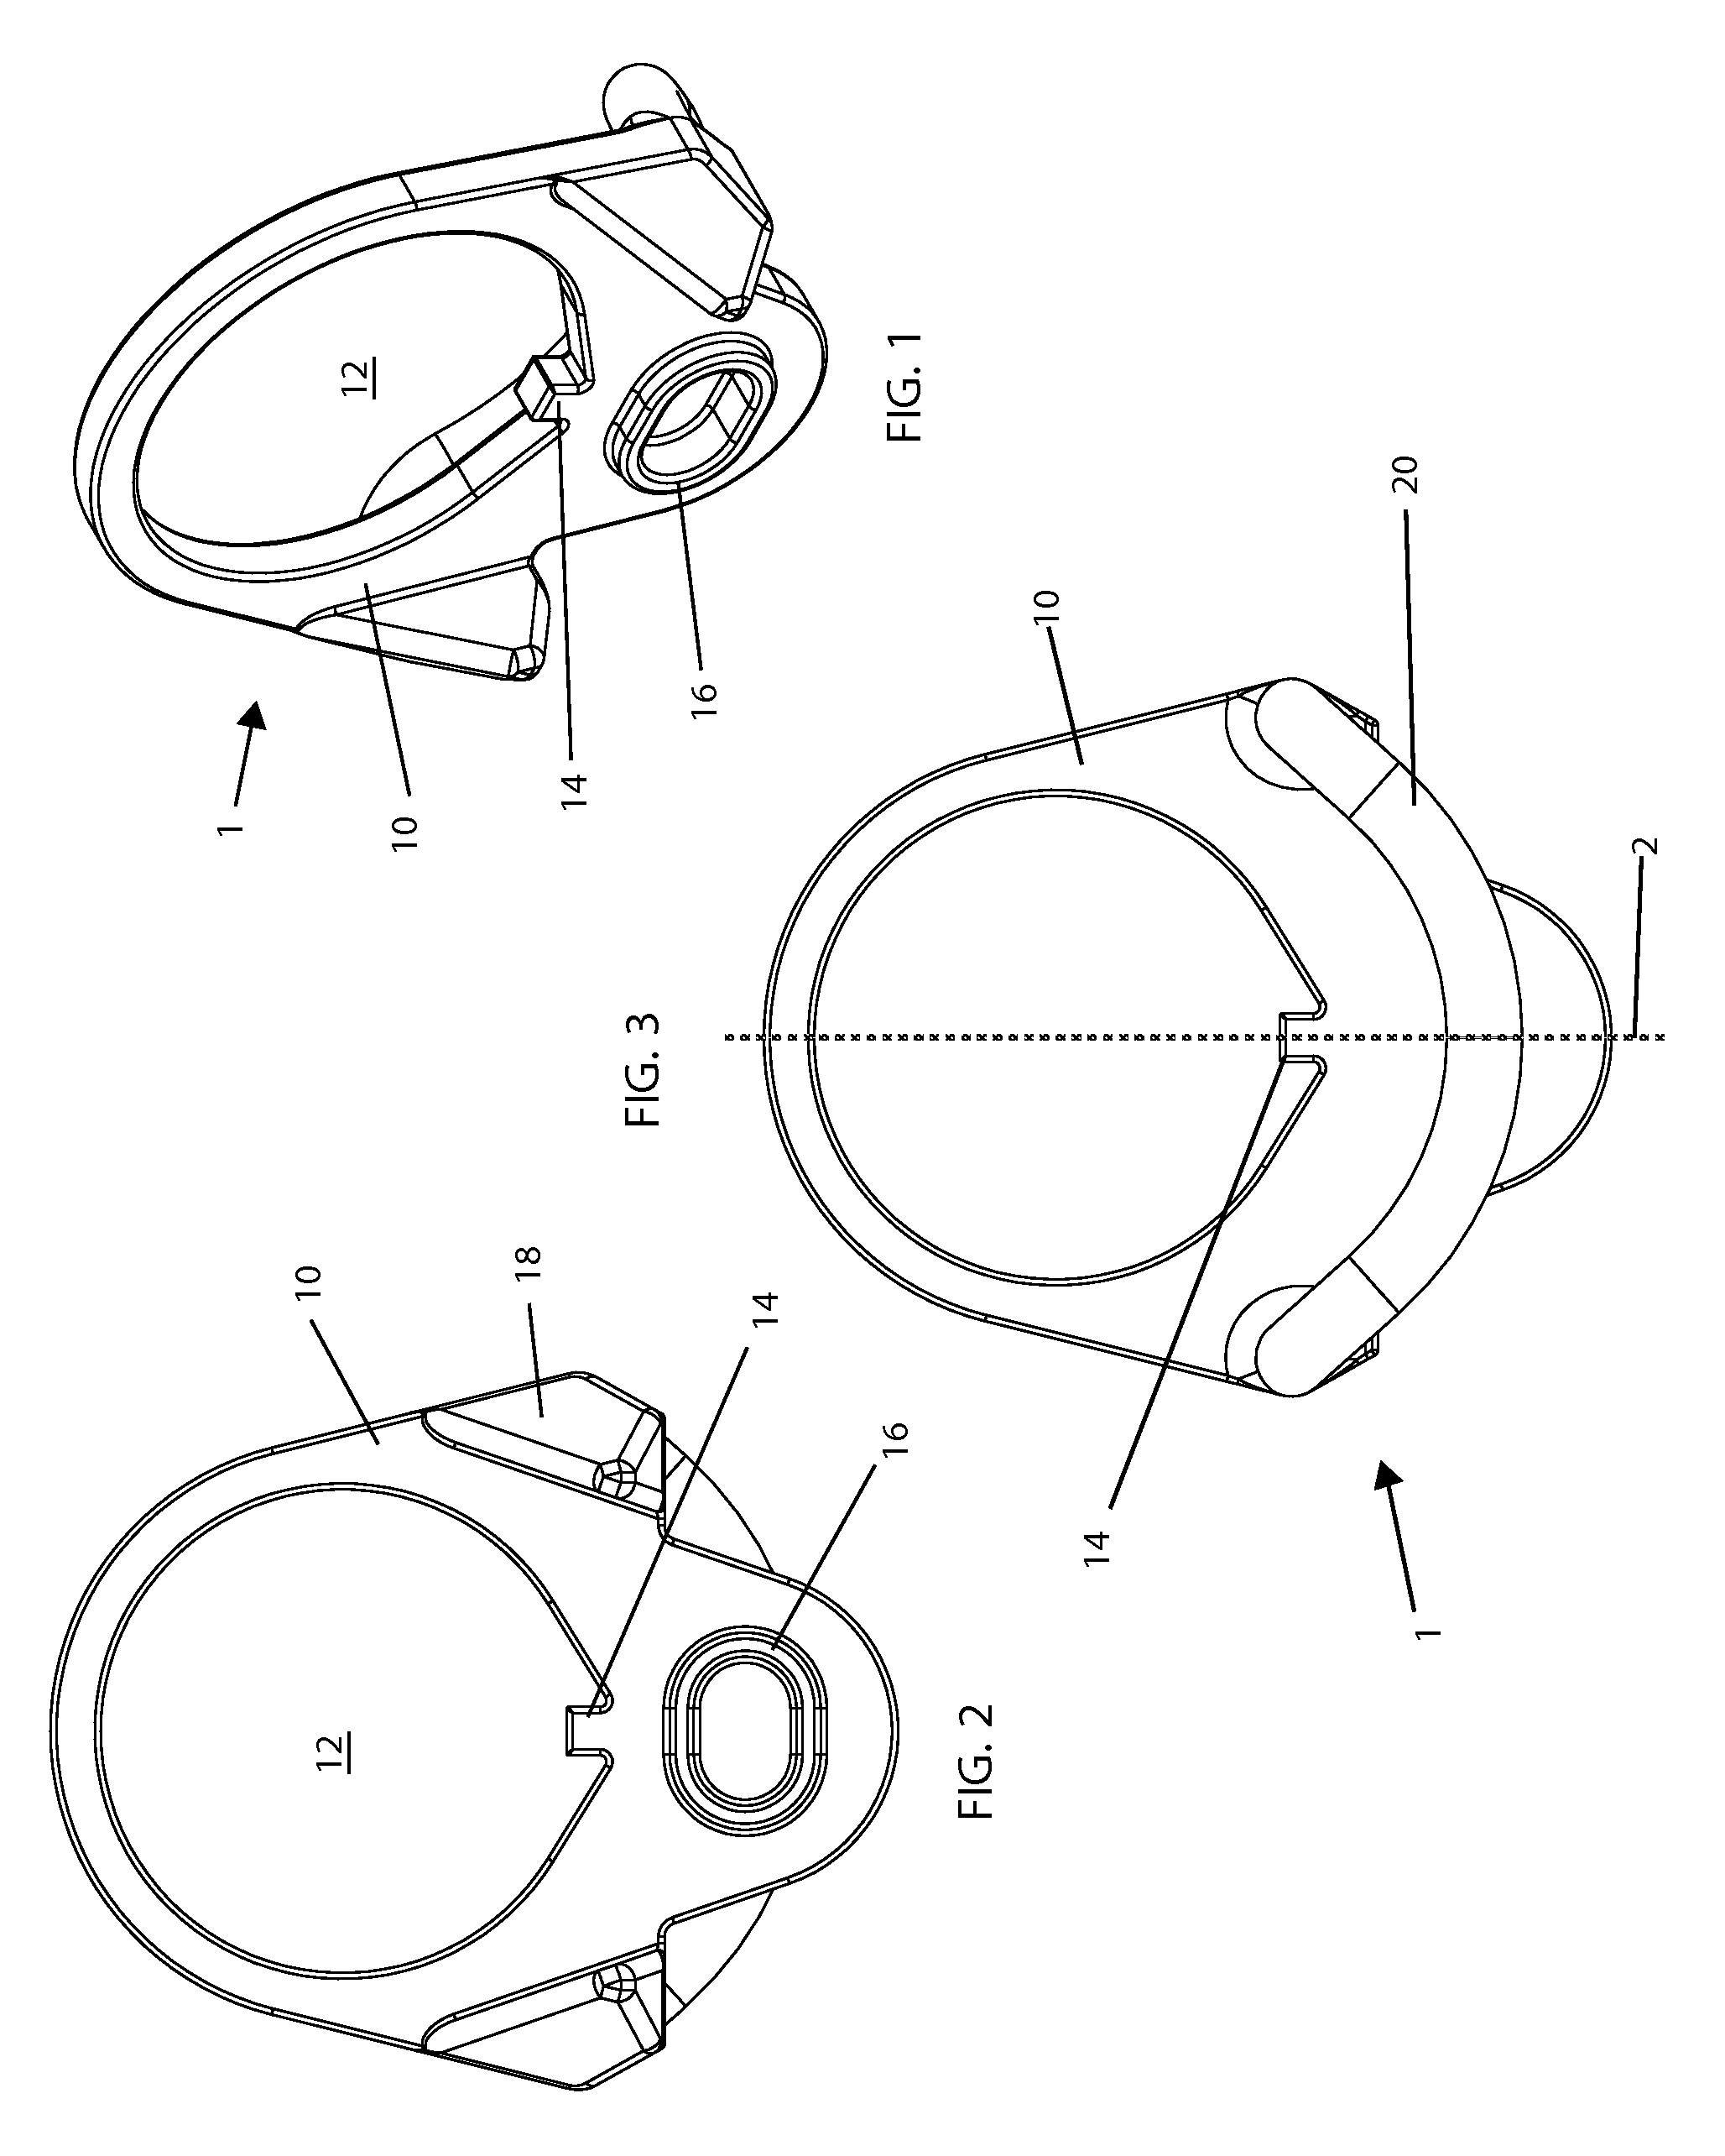 Sling Fittings and sling system for a firearm